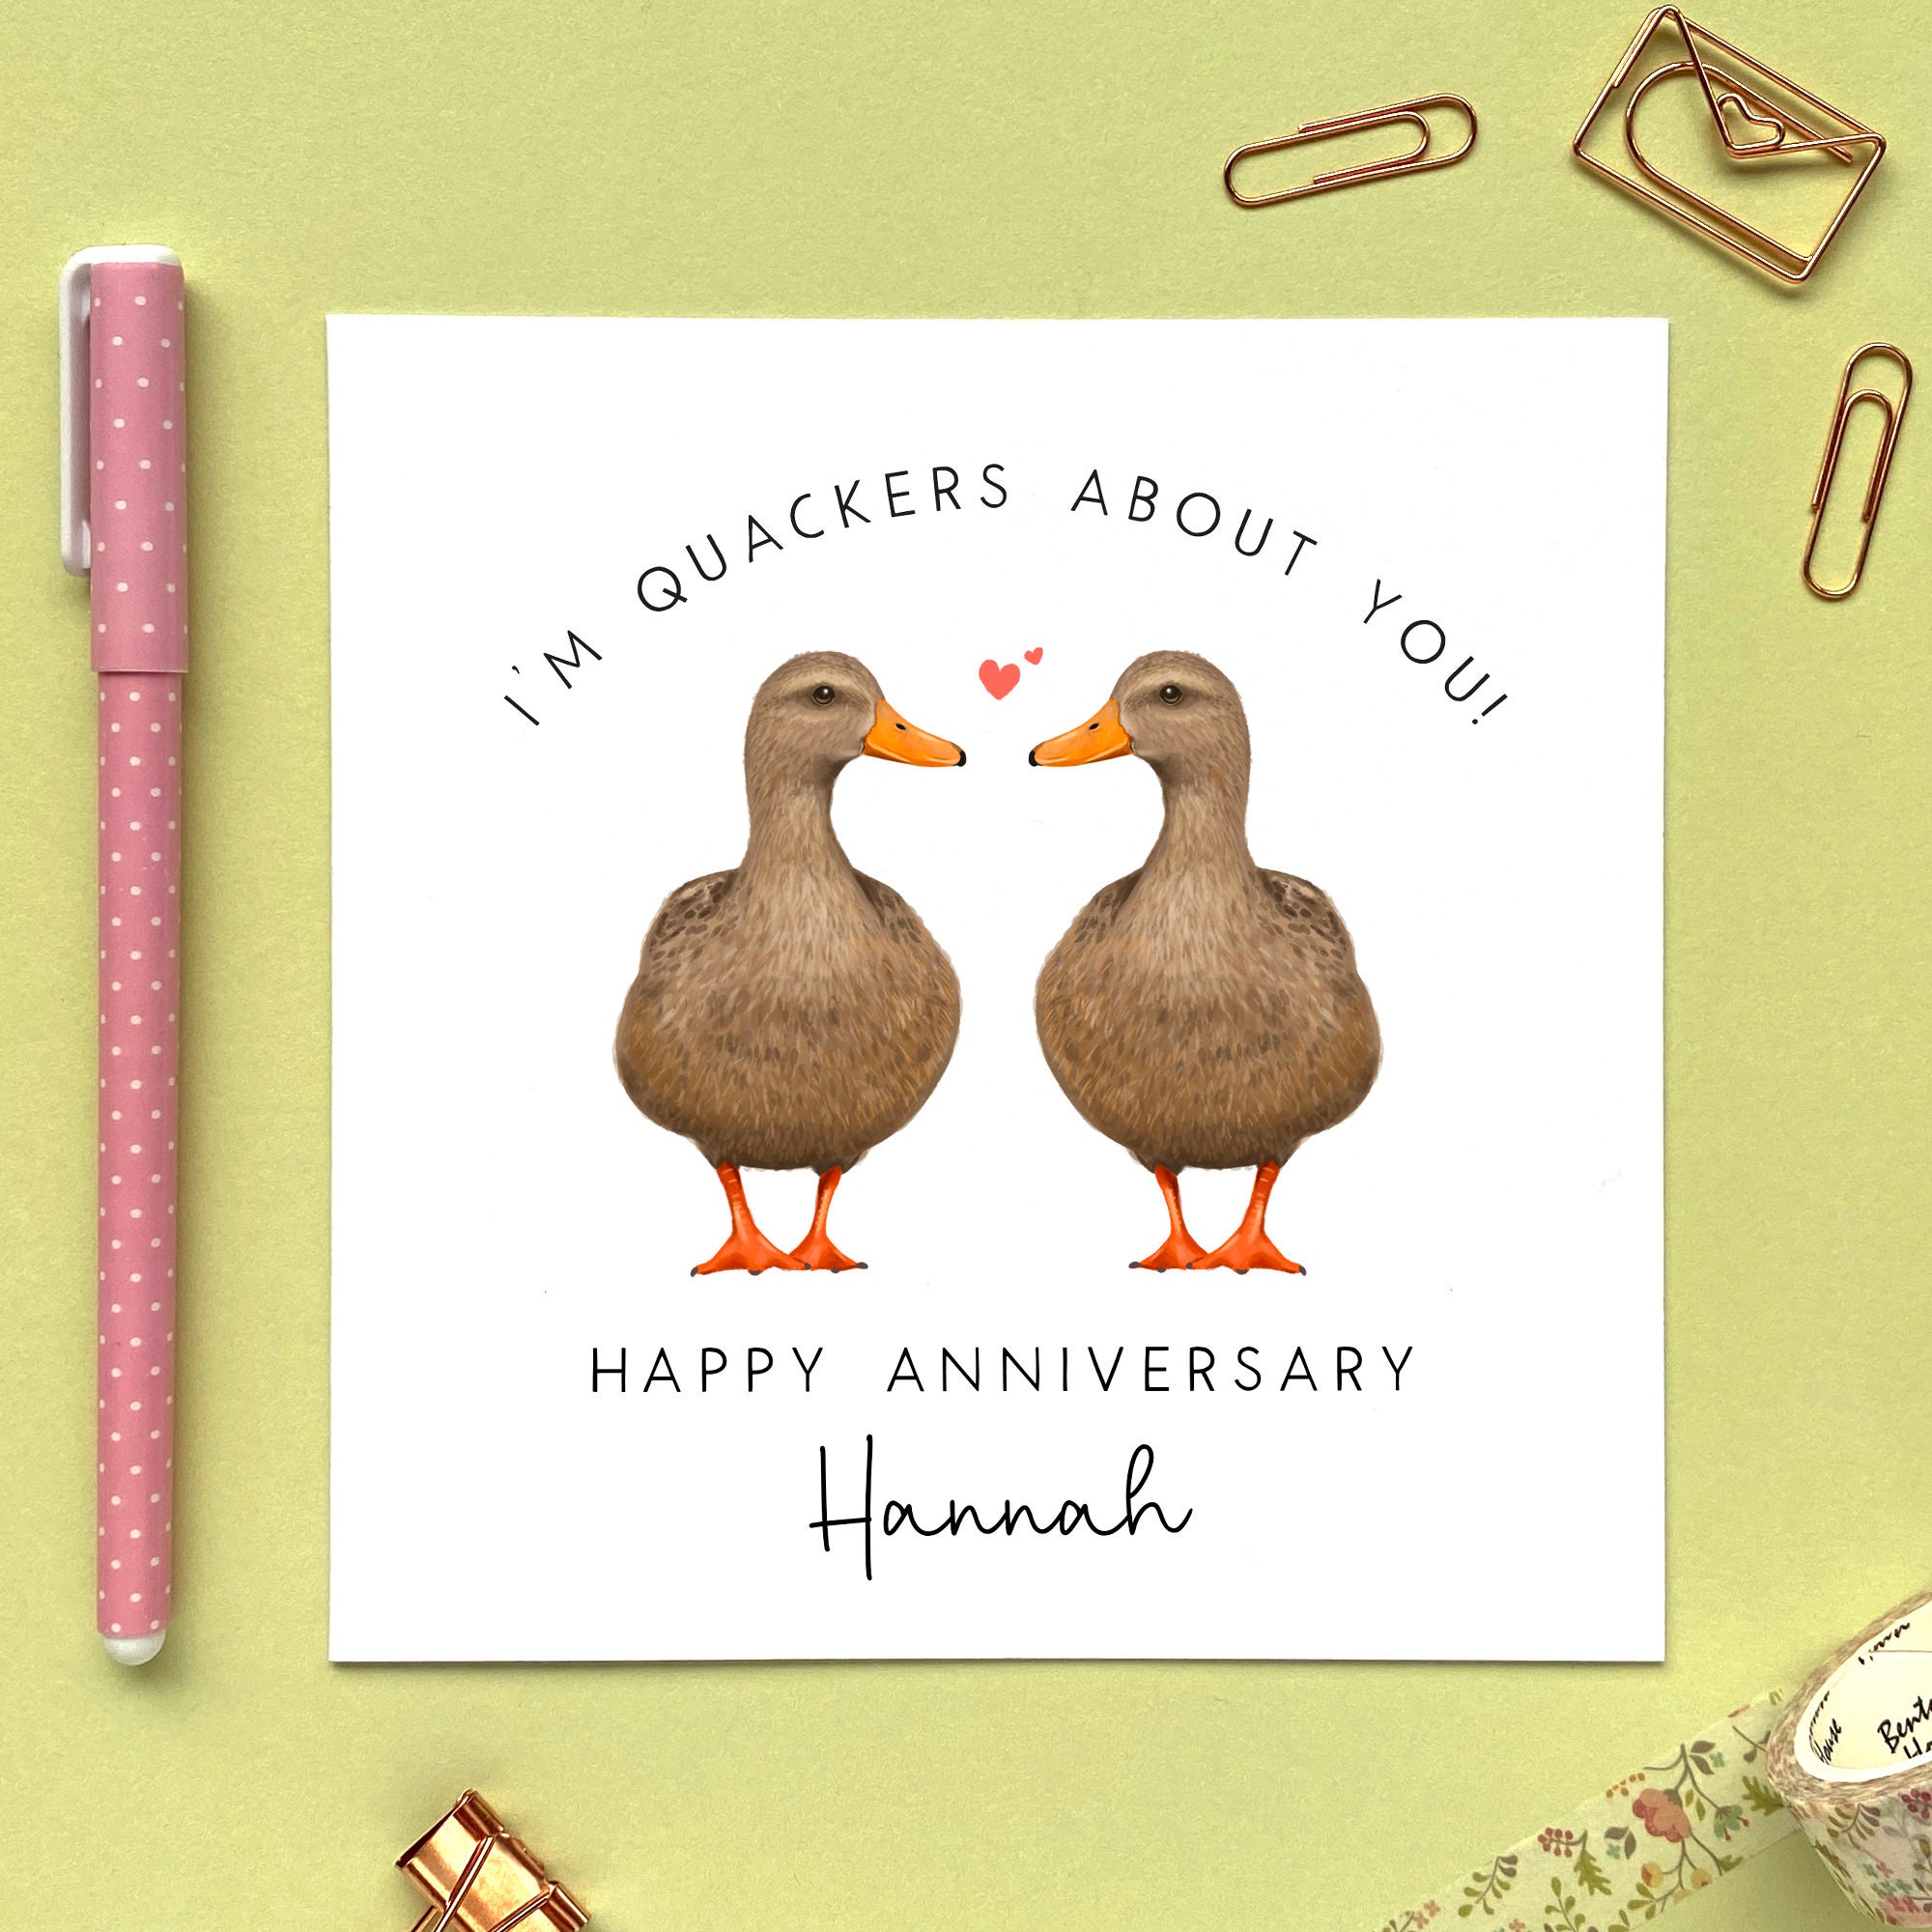 Miniature Duck Gifts, Quackers About You, Anniversary Husband Wife